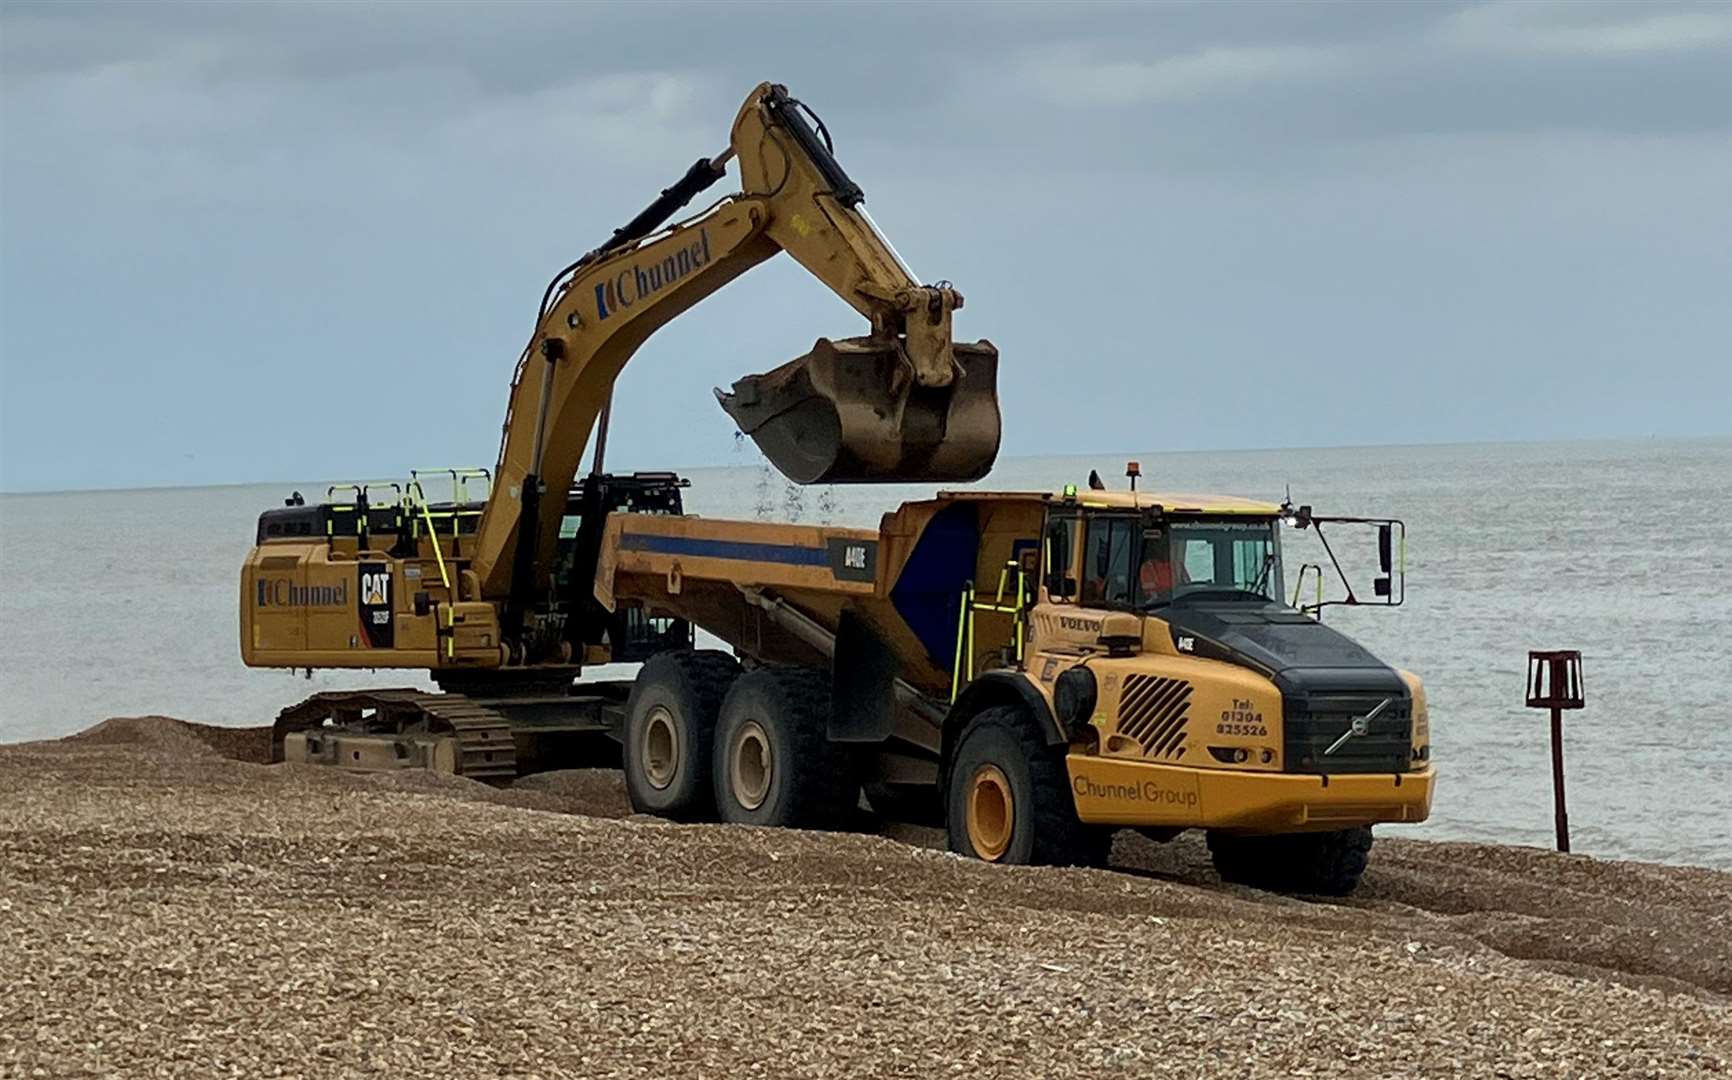 Beach works in Deal began this week and are set to last a month